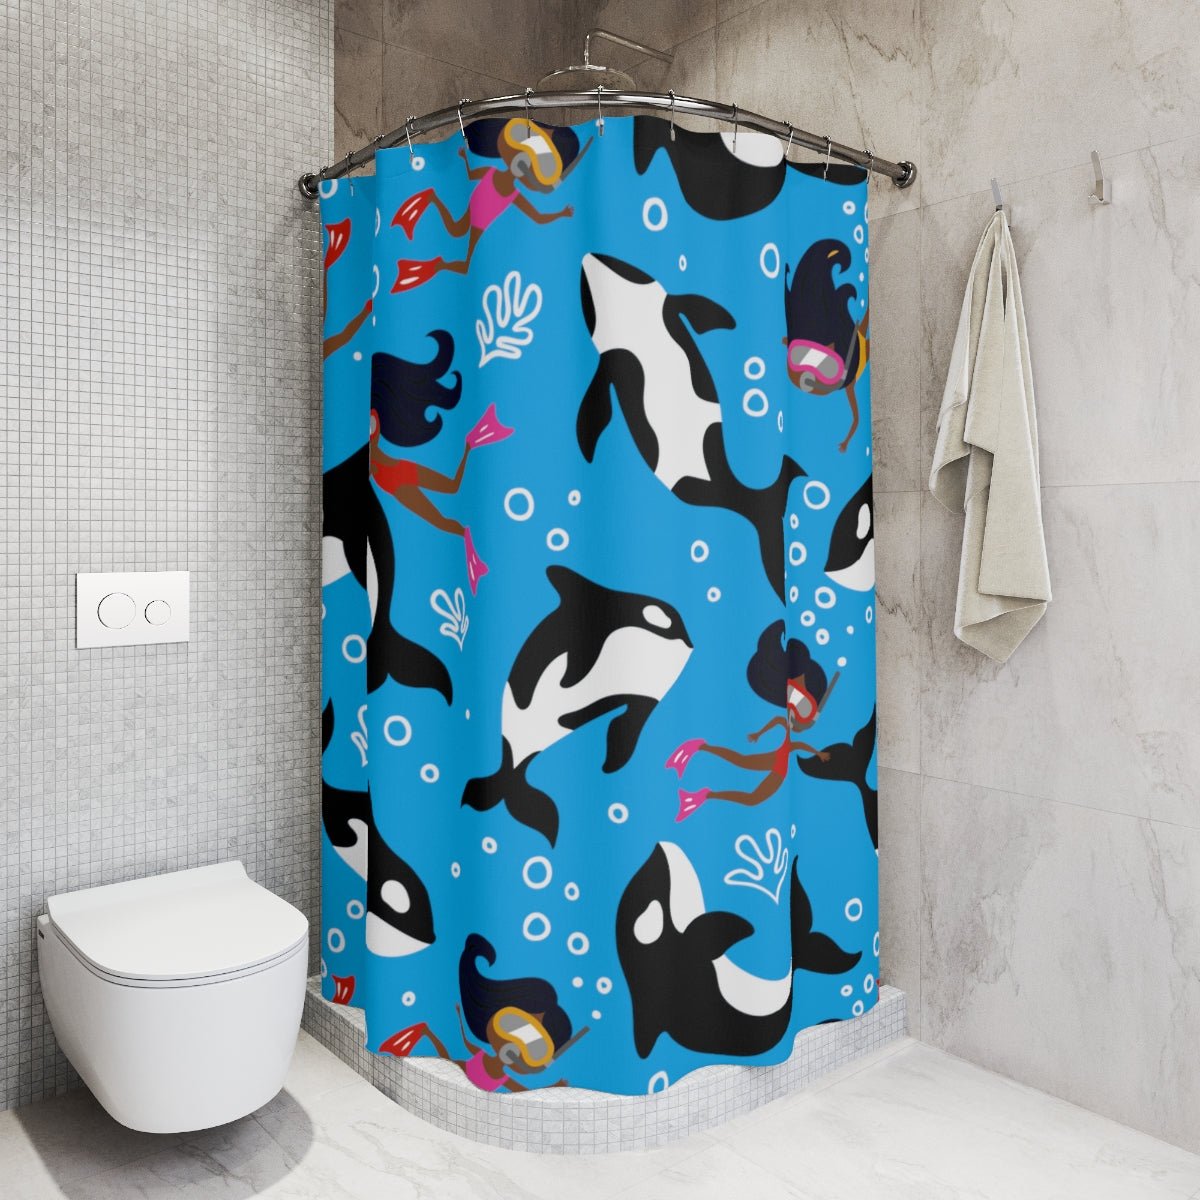 Swim with Whales Shower Curtain - The Trini Gee